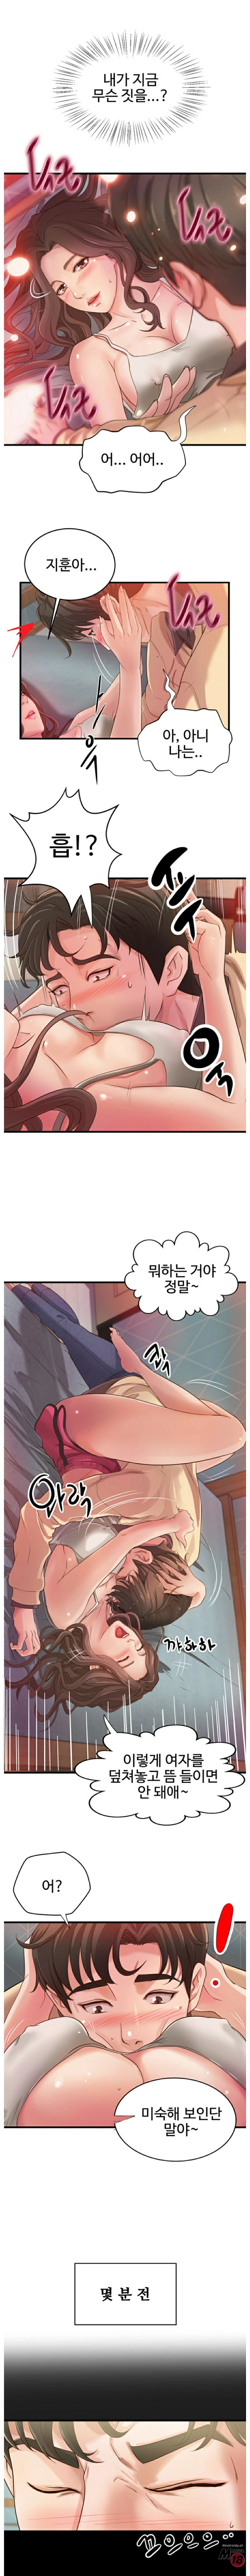 Sister’s Sex Education Raw - Chapter 2 Page 7